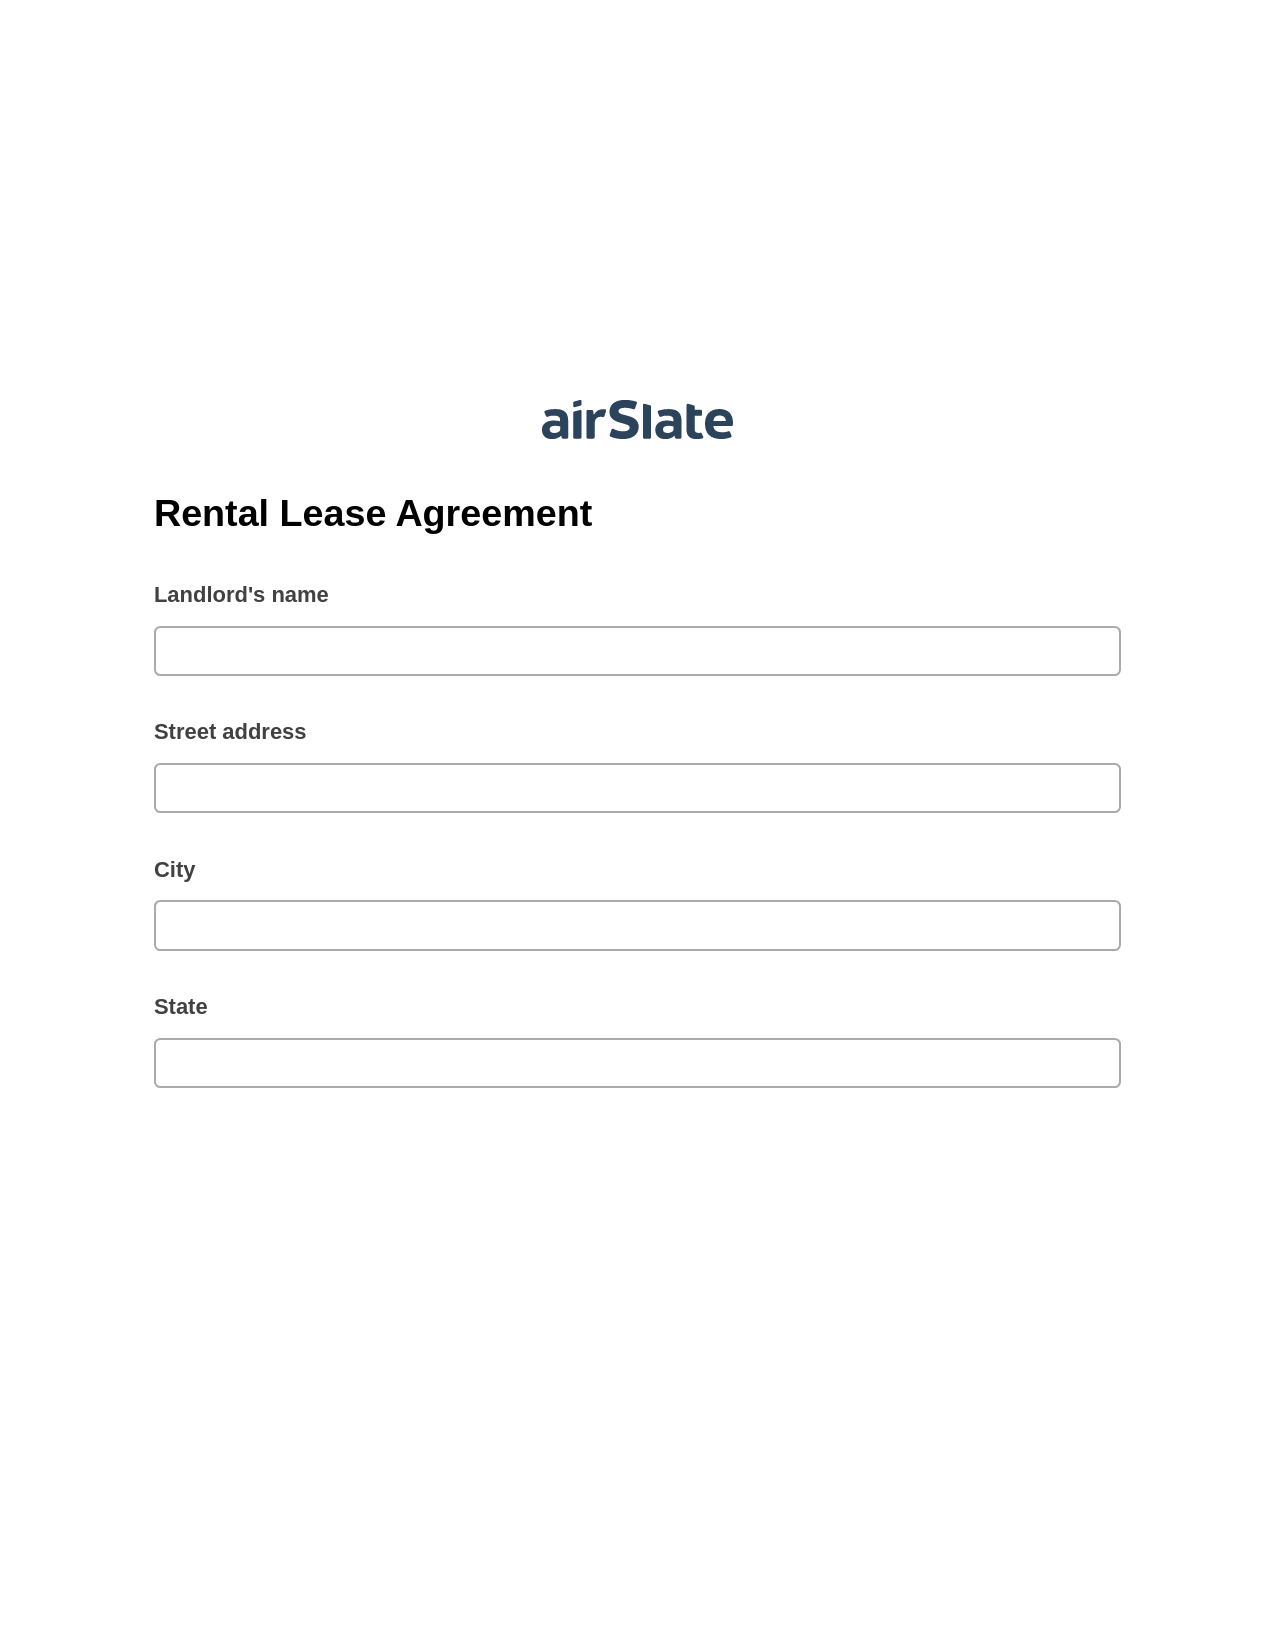 Rental Lease Agreement Pre-fill from CSV File Bot, Update Salesforce Record Bot, Archive to SharePoint Folder Bot